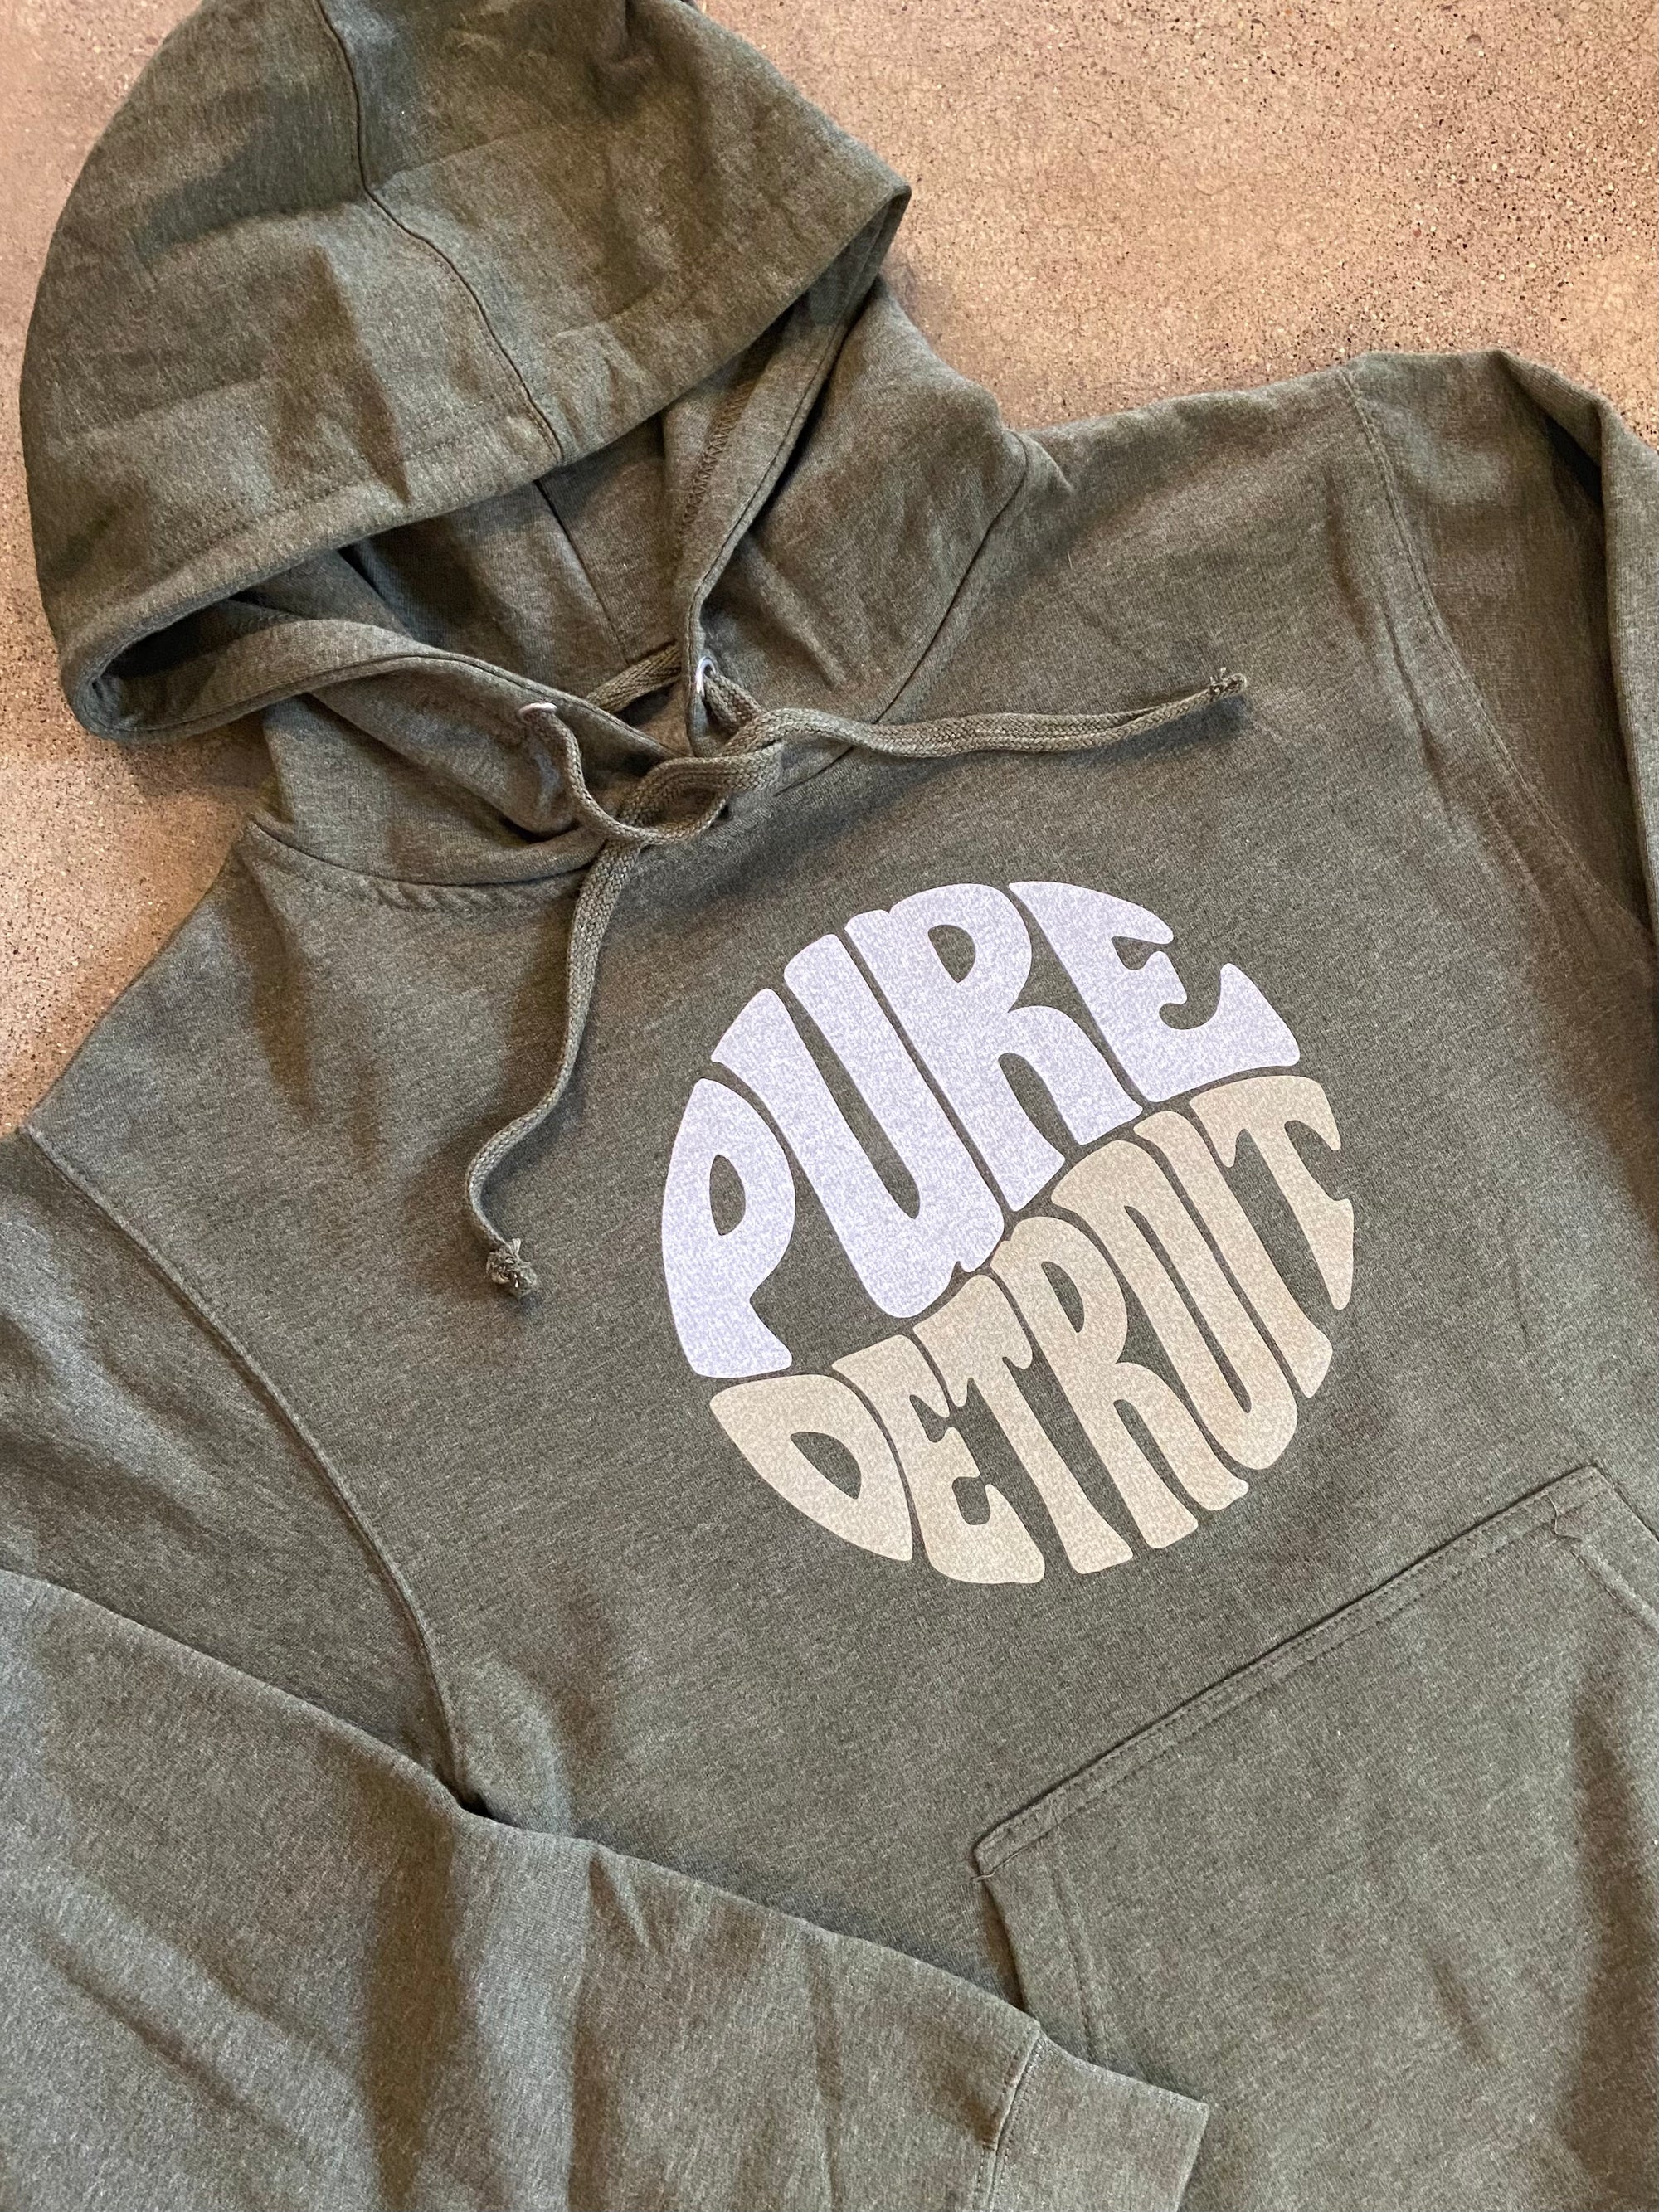 Pure Detroit Retro Hooded Pullover / White and Khaki + Army / Unisex Unisex Apparel   